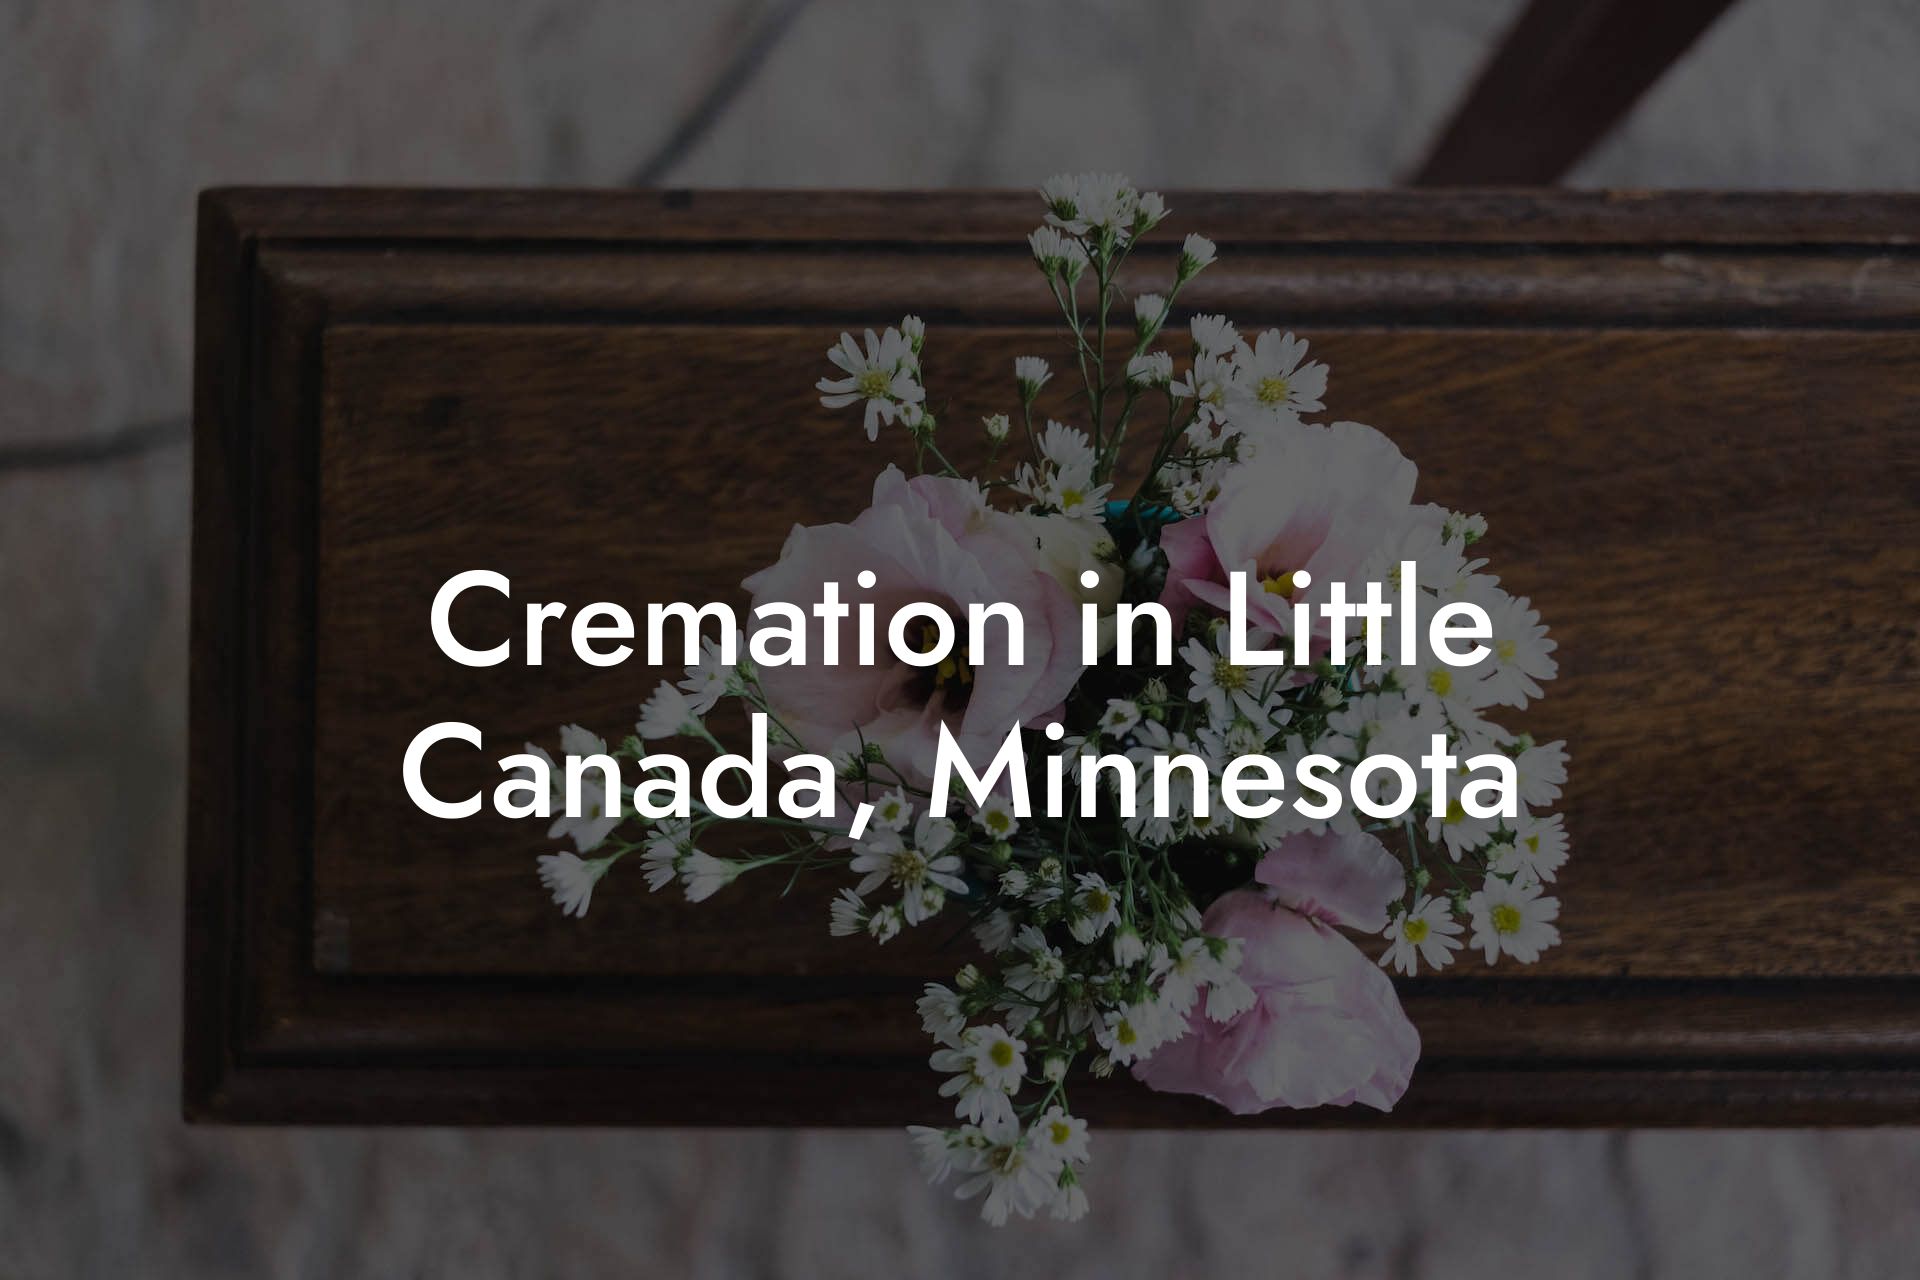 Cremation in Little Canada, Minnesota